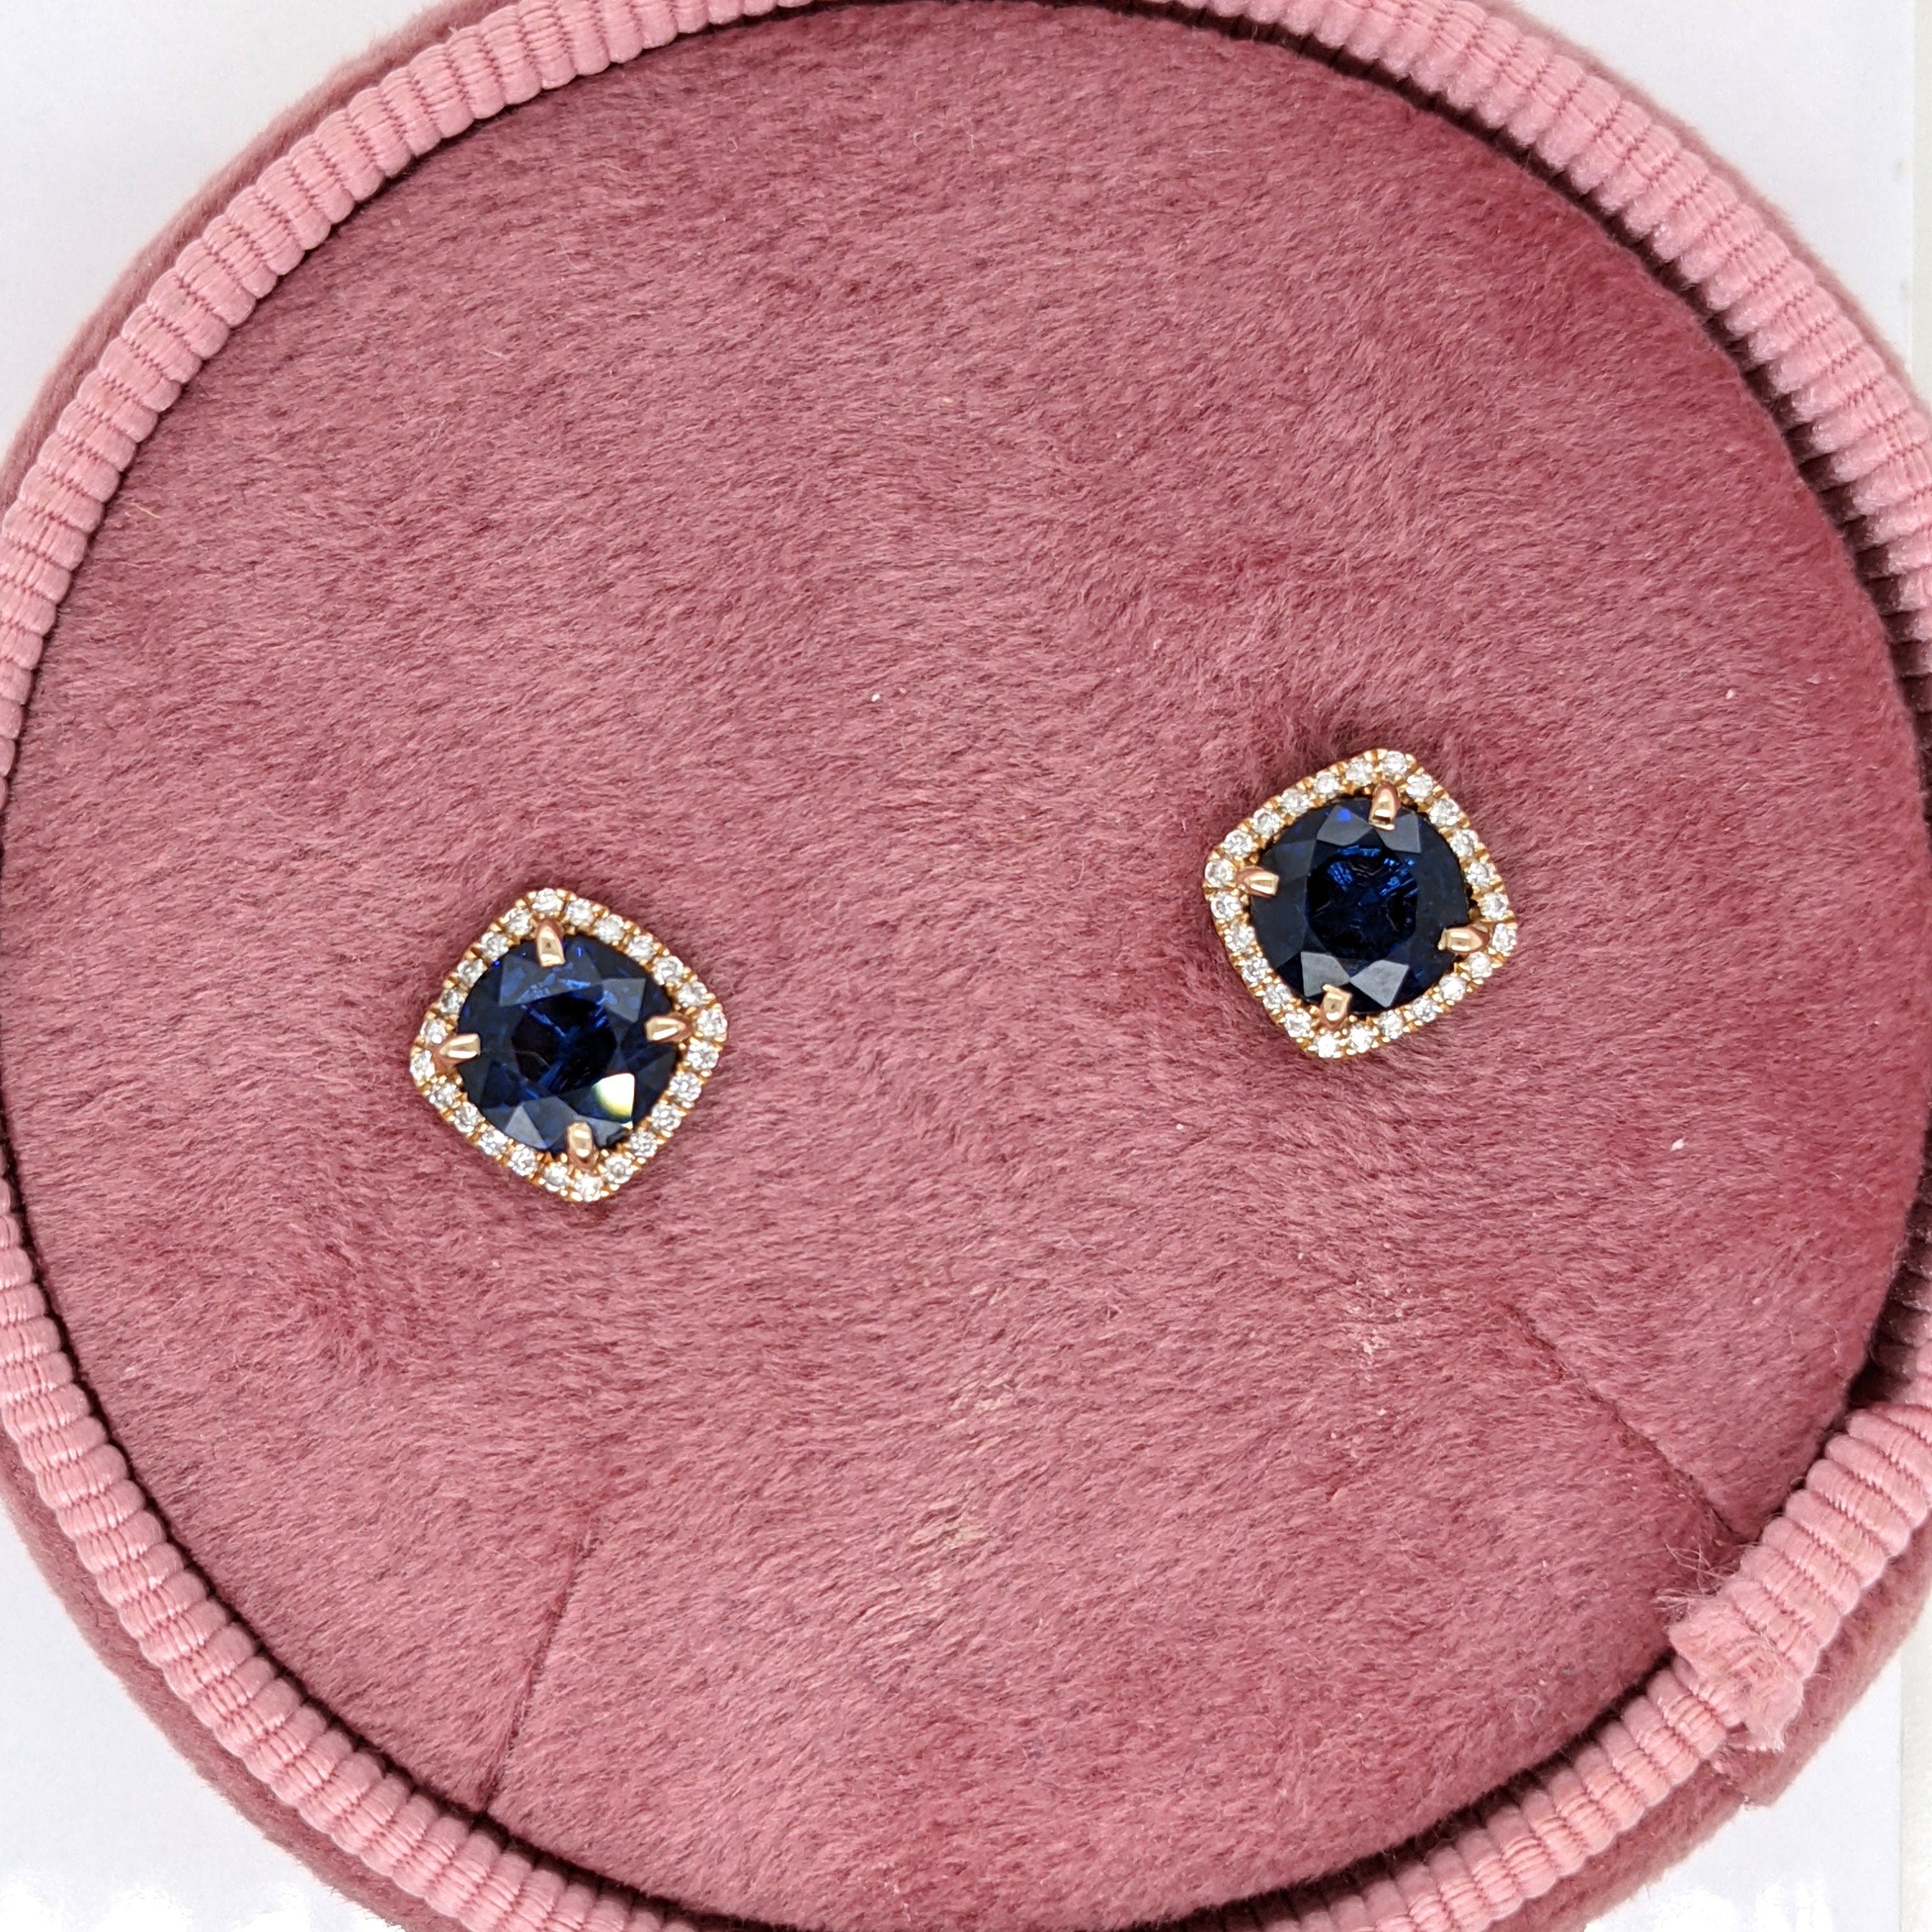 Ceylon Sapphire Studs in Solid 14K Yellow Gold with a Natural Diamond Halo | Cushion | Blue Gemstone | Classic | Elegant | Sept Birthstone